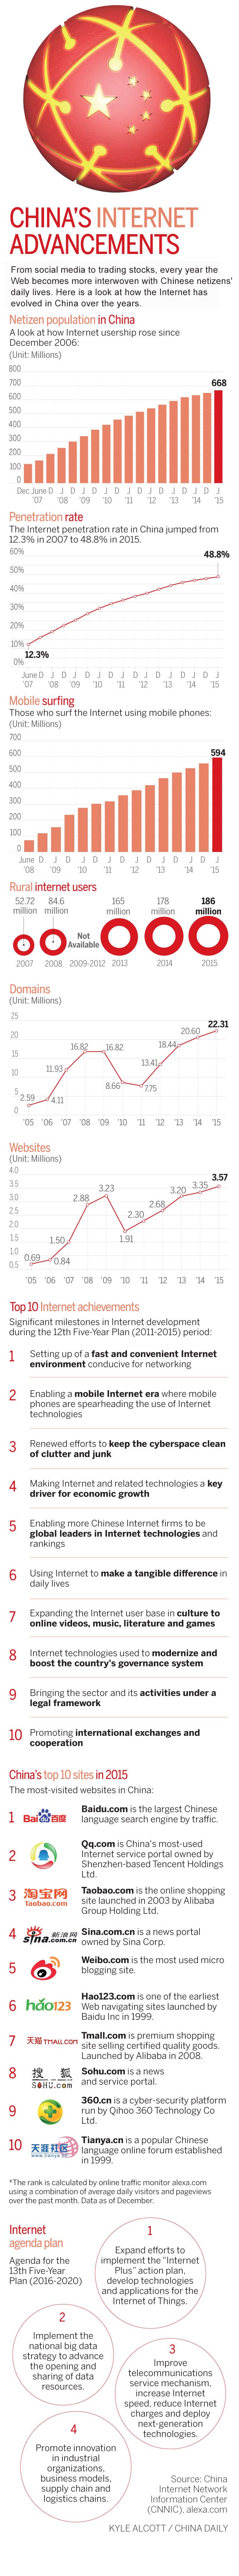 China's Internet advancements in the past decade